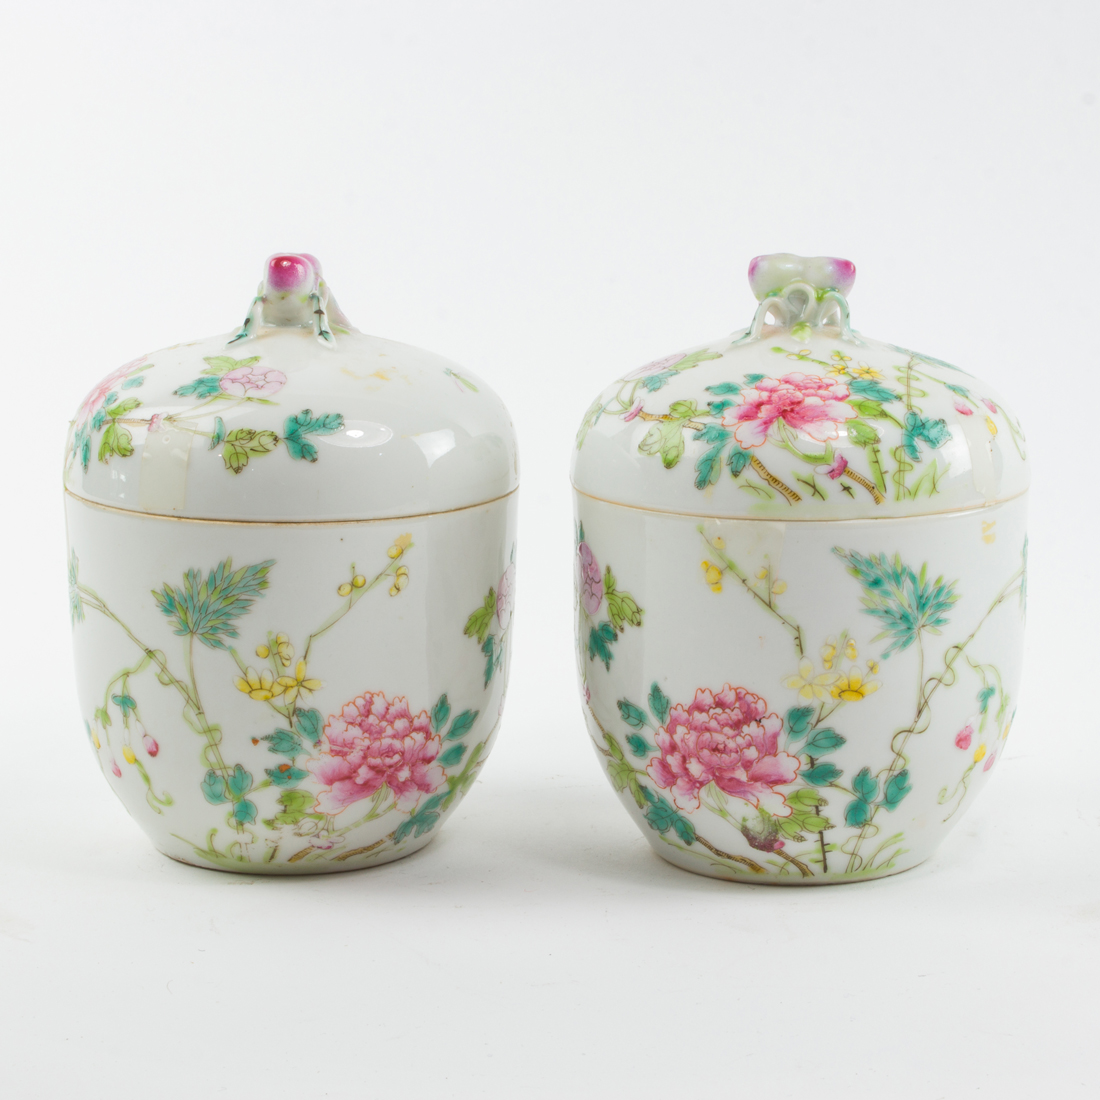 PAIR OF CHINESE FAMILLE ROSE LIDDED